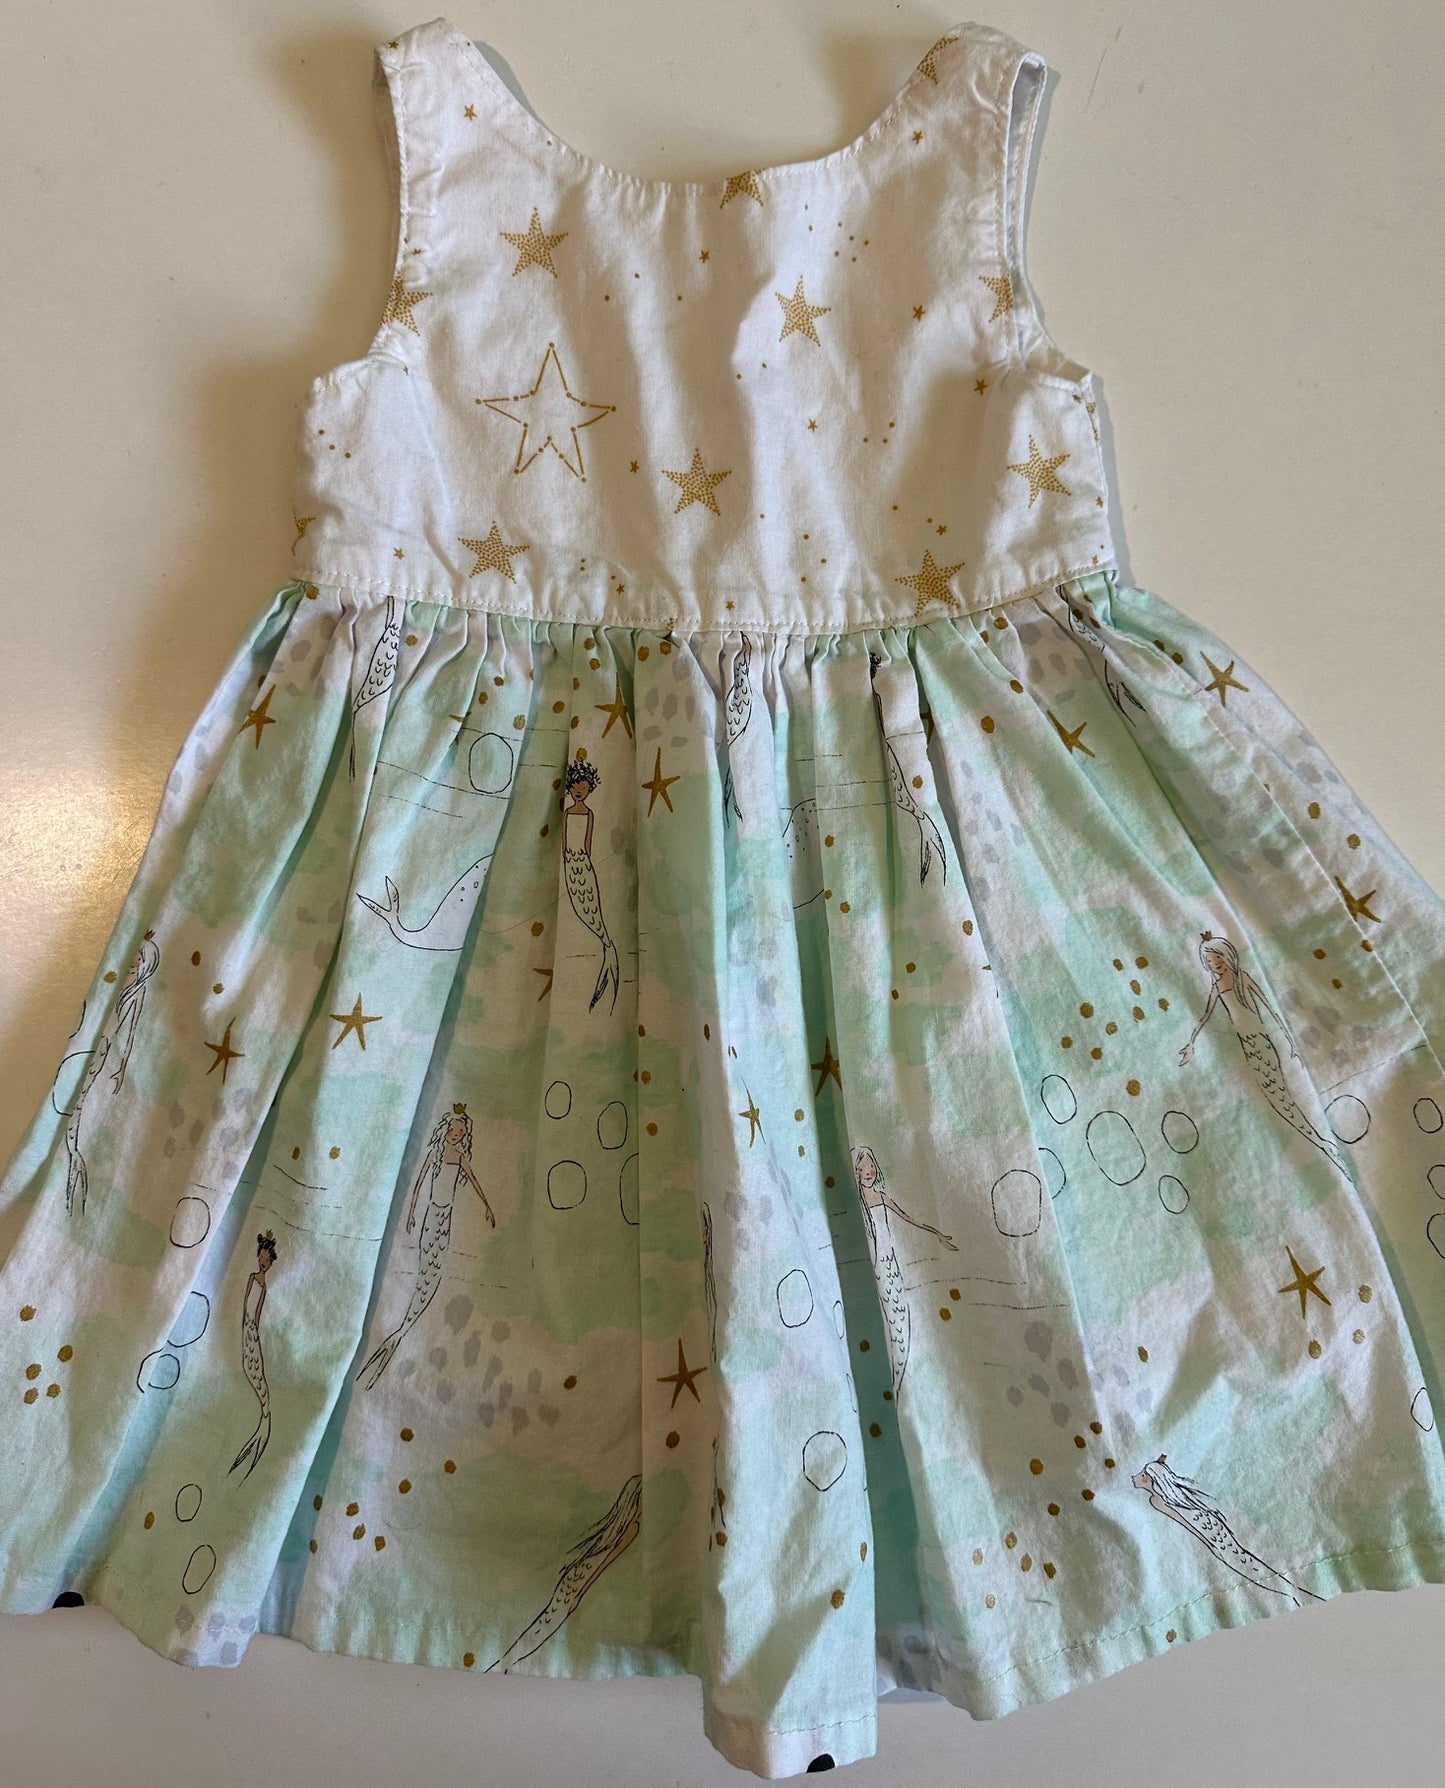 Unknown Brand, White and Pale Teal Stars/Mermaids Dress - 18-24 Months